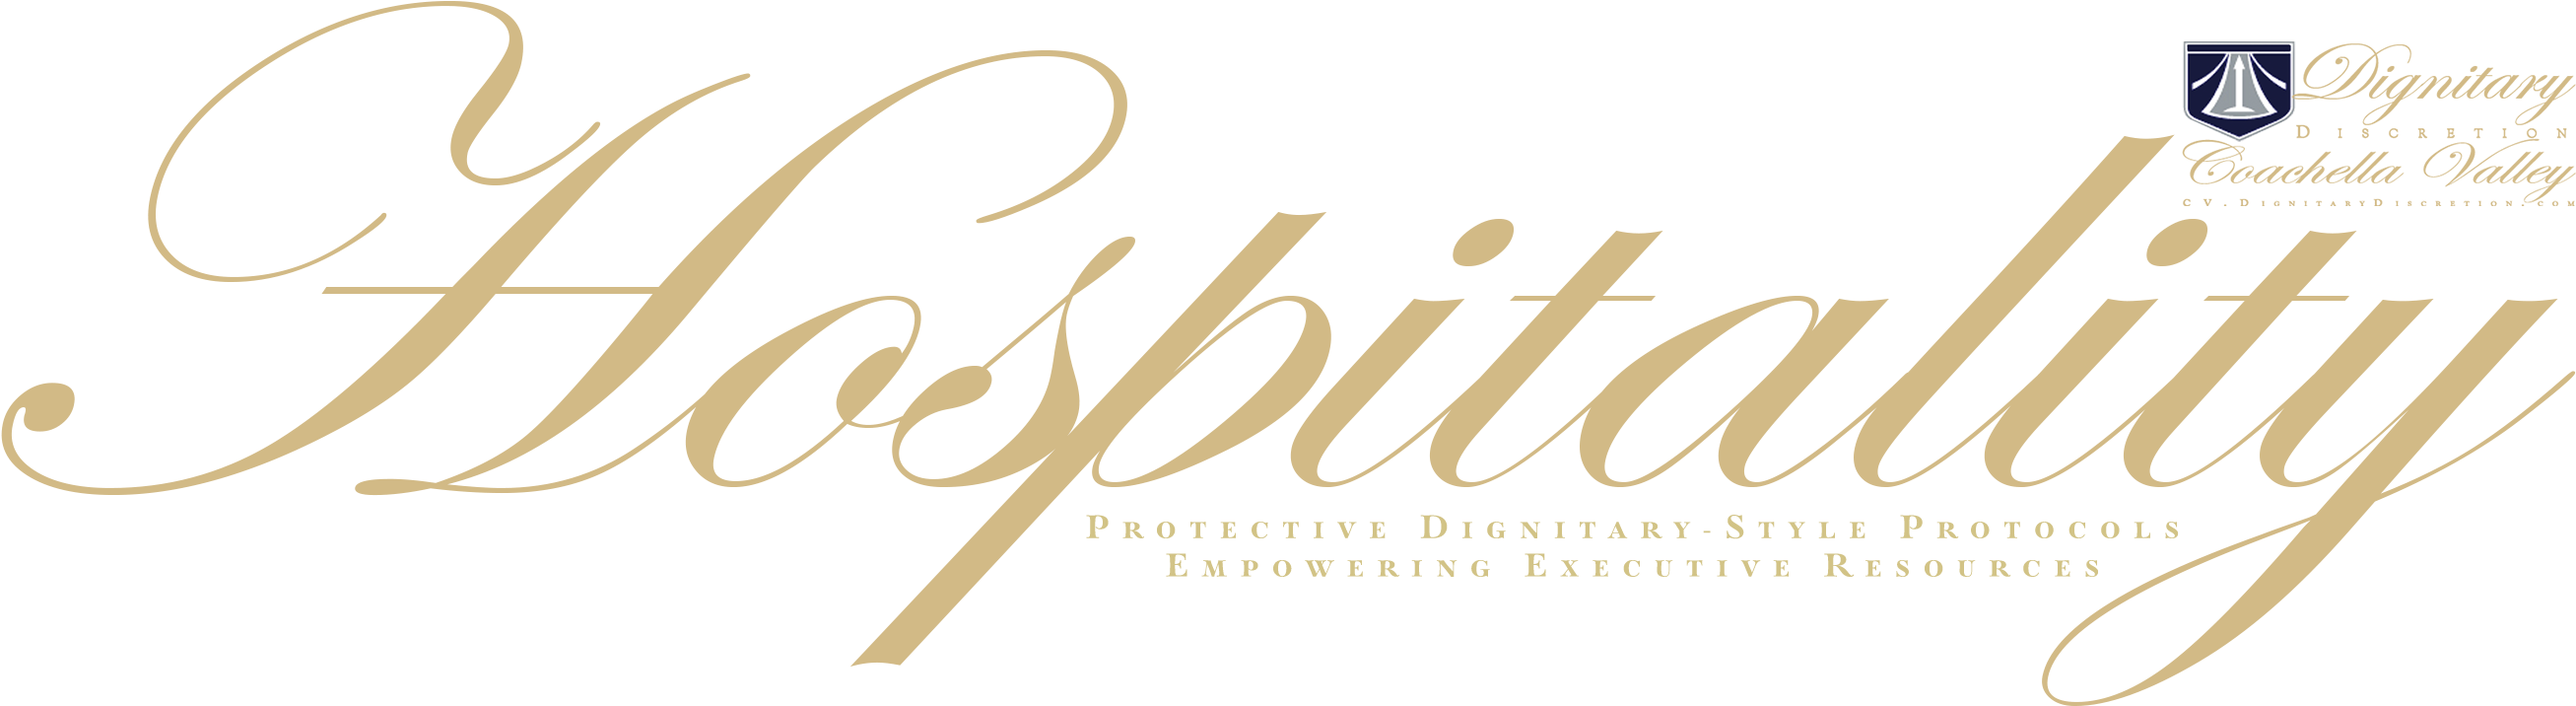 Five Star Plus Secret Hospitality By Dignitary Discretion - Calligraphy (2880x750), Png Download